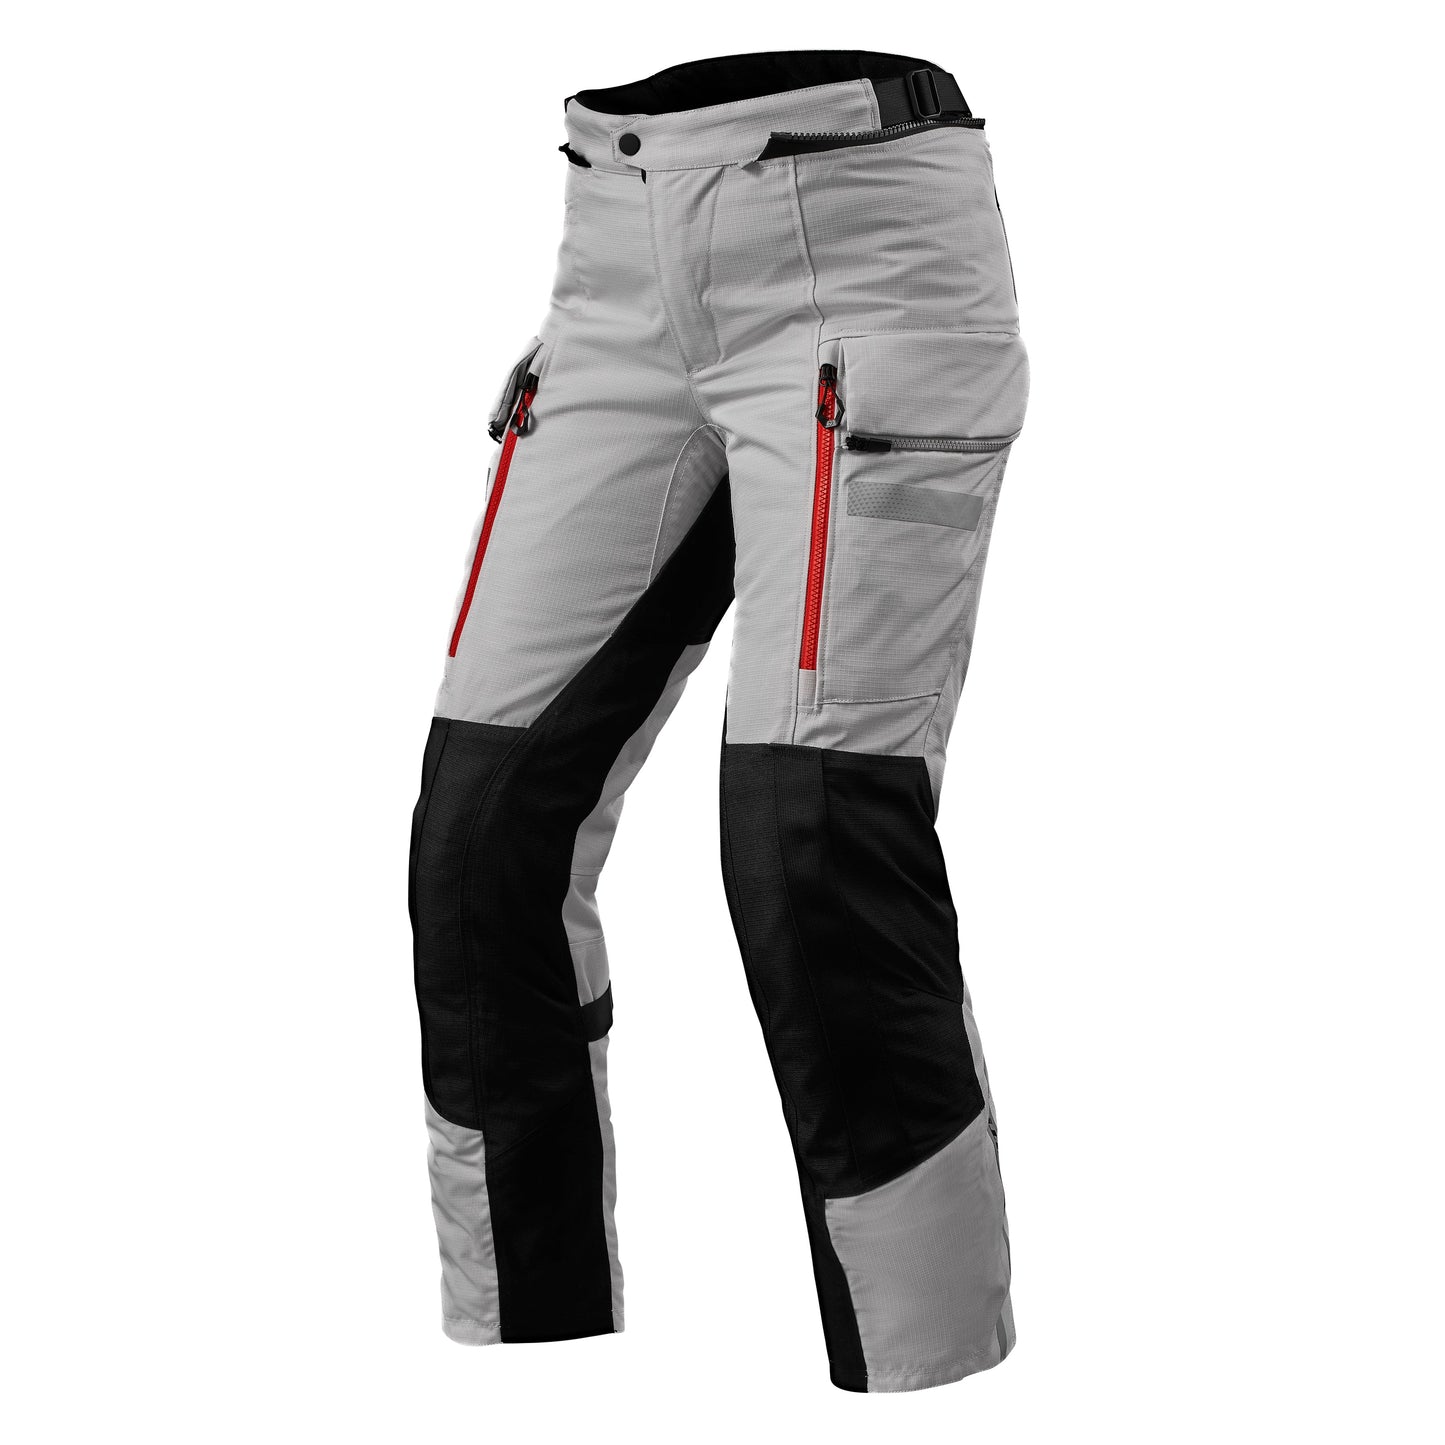 REV'IT! Sand 4 H2O Ladies Trousers